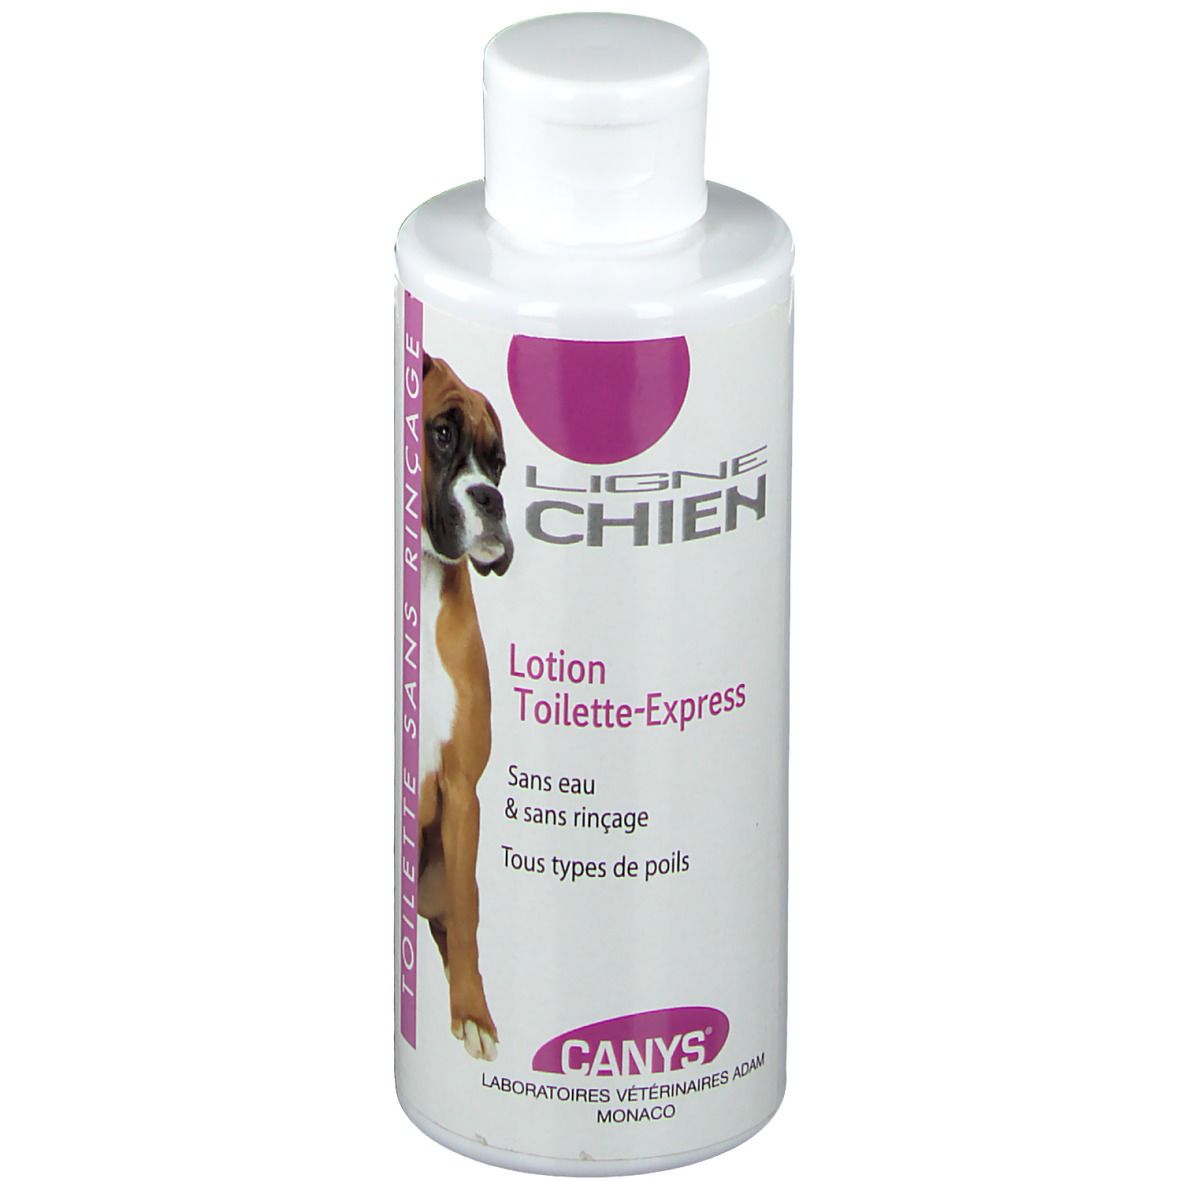 Canys® Lotion toilette-express